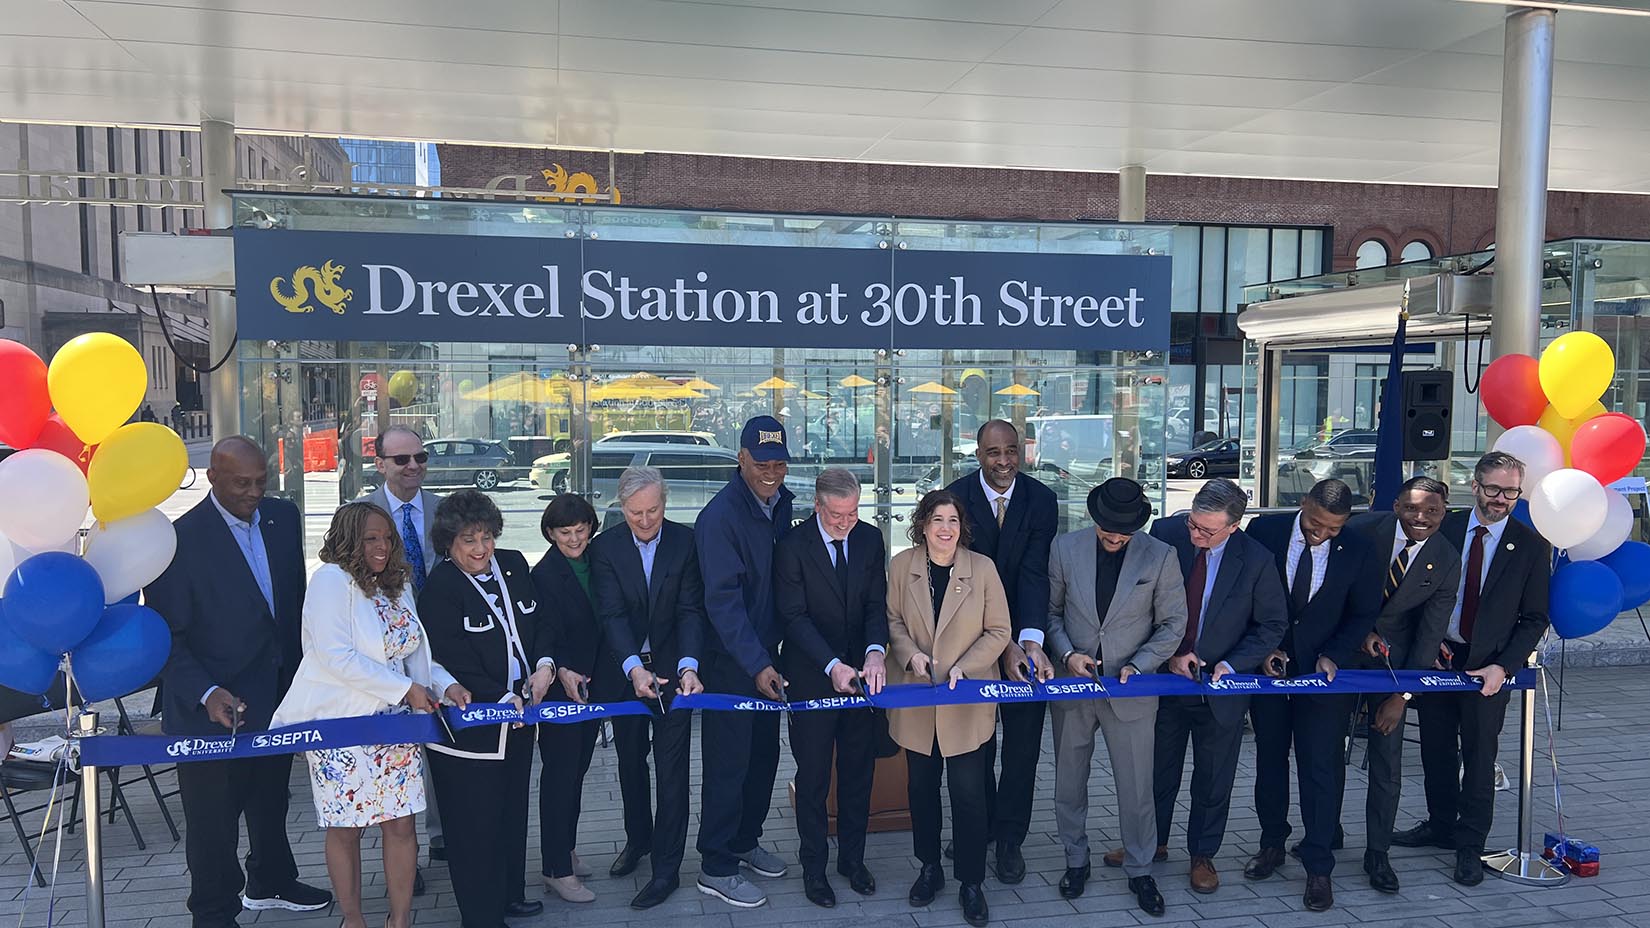 Renovated Drexel Station at 30th Street Welcomes Customers in Schuylkill Yards